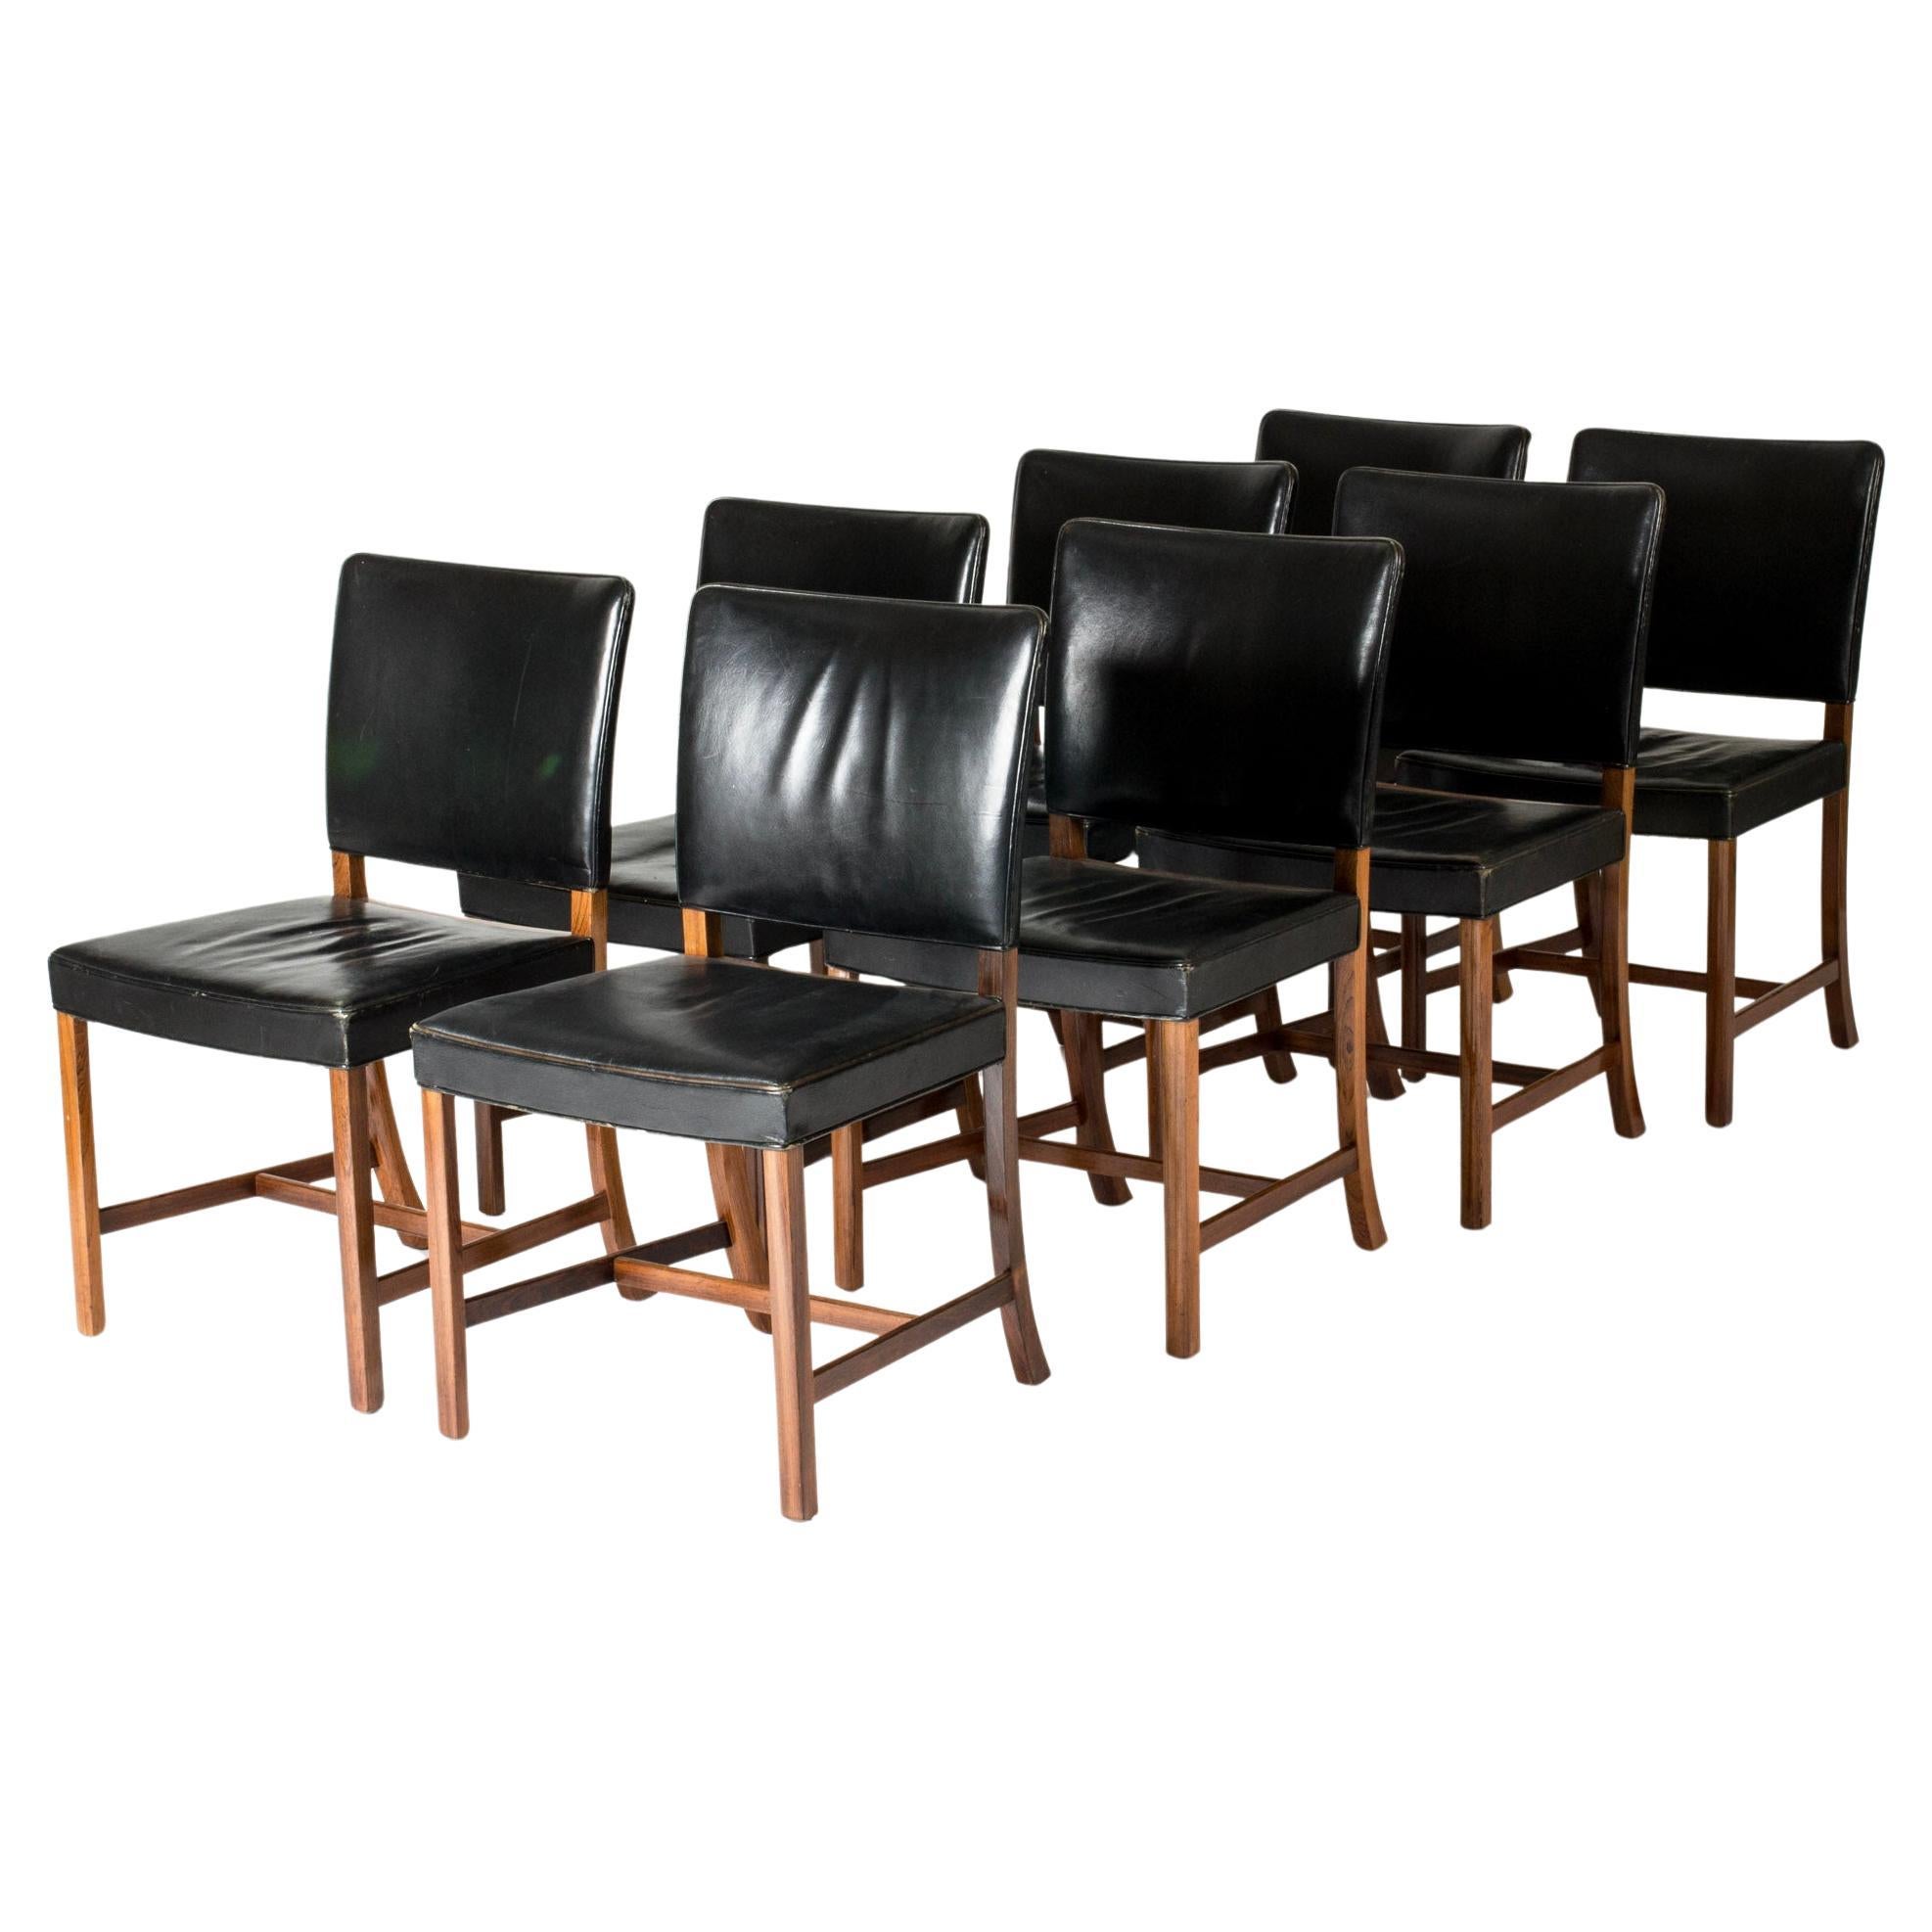 A.J. Iversen Dining Room Chairs